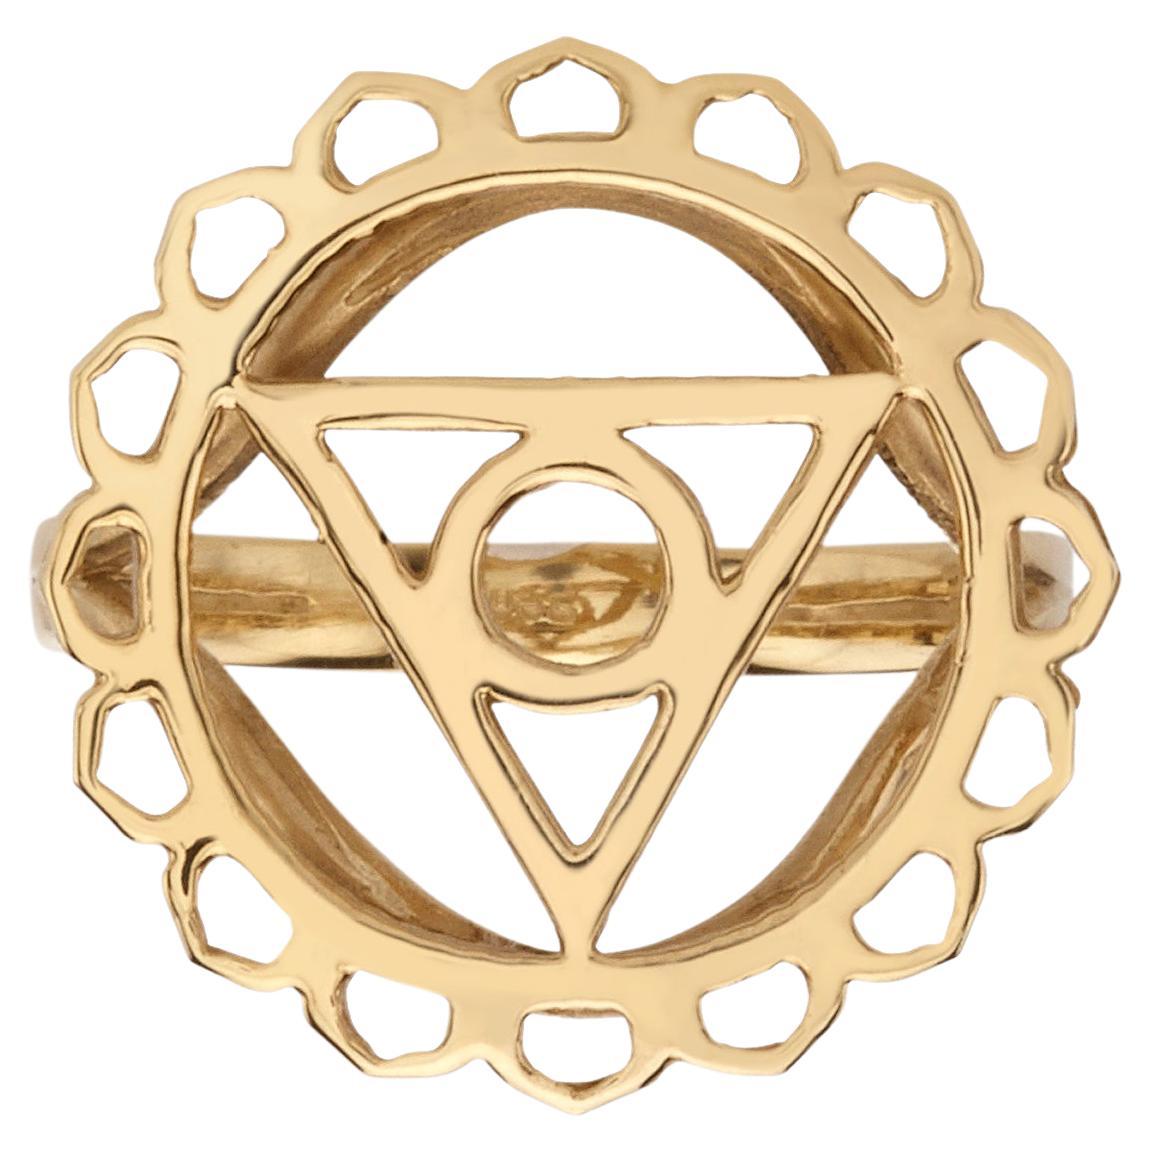 Handcrafted Yoga Ring with the Vissuddha Throat Chakra in 14Kt Gold